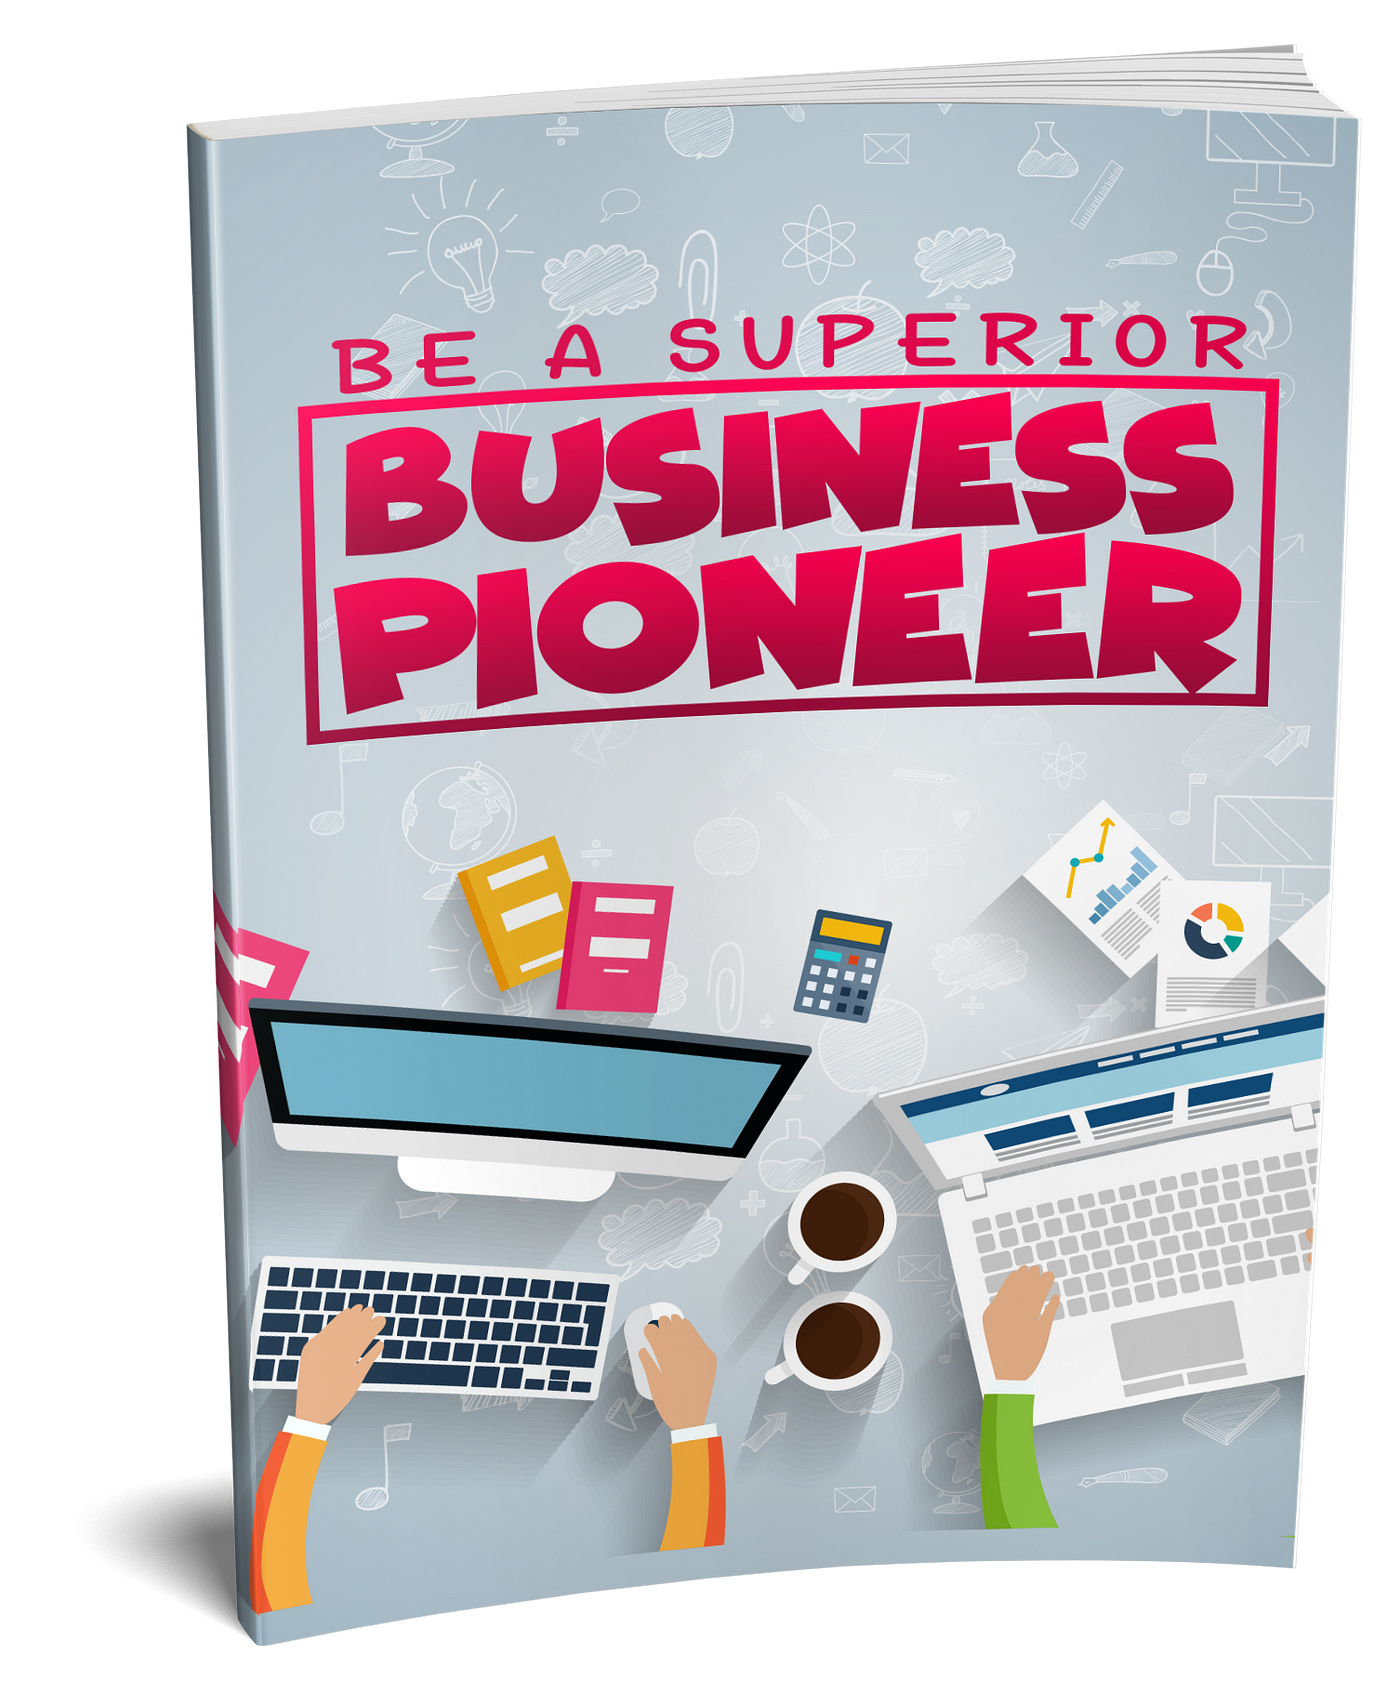 Be a Superior Business Pioneer